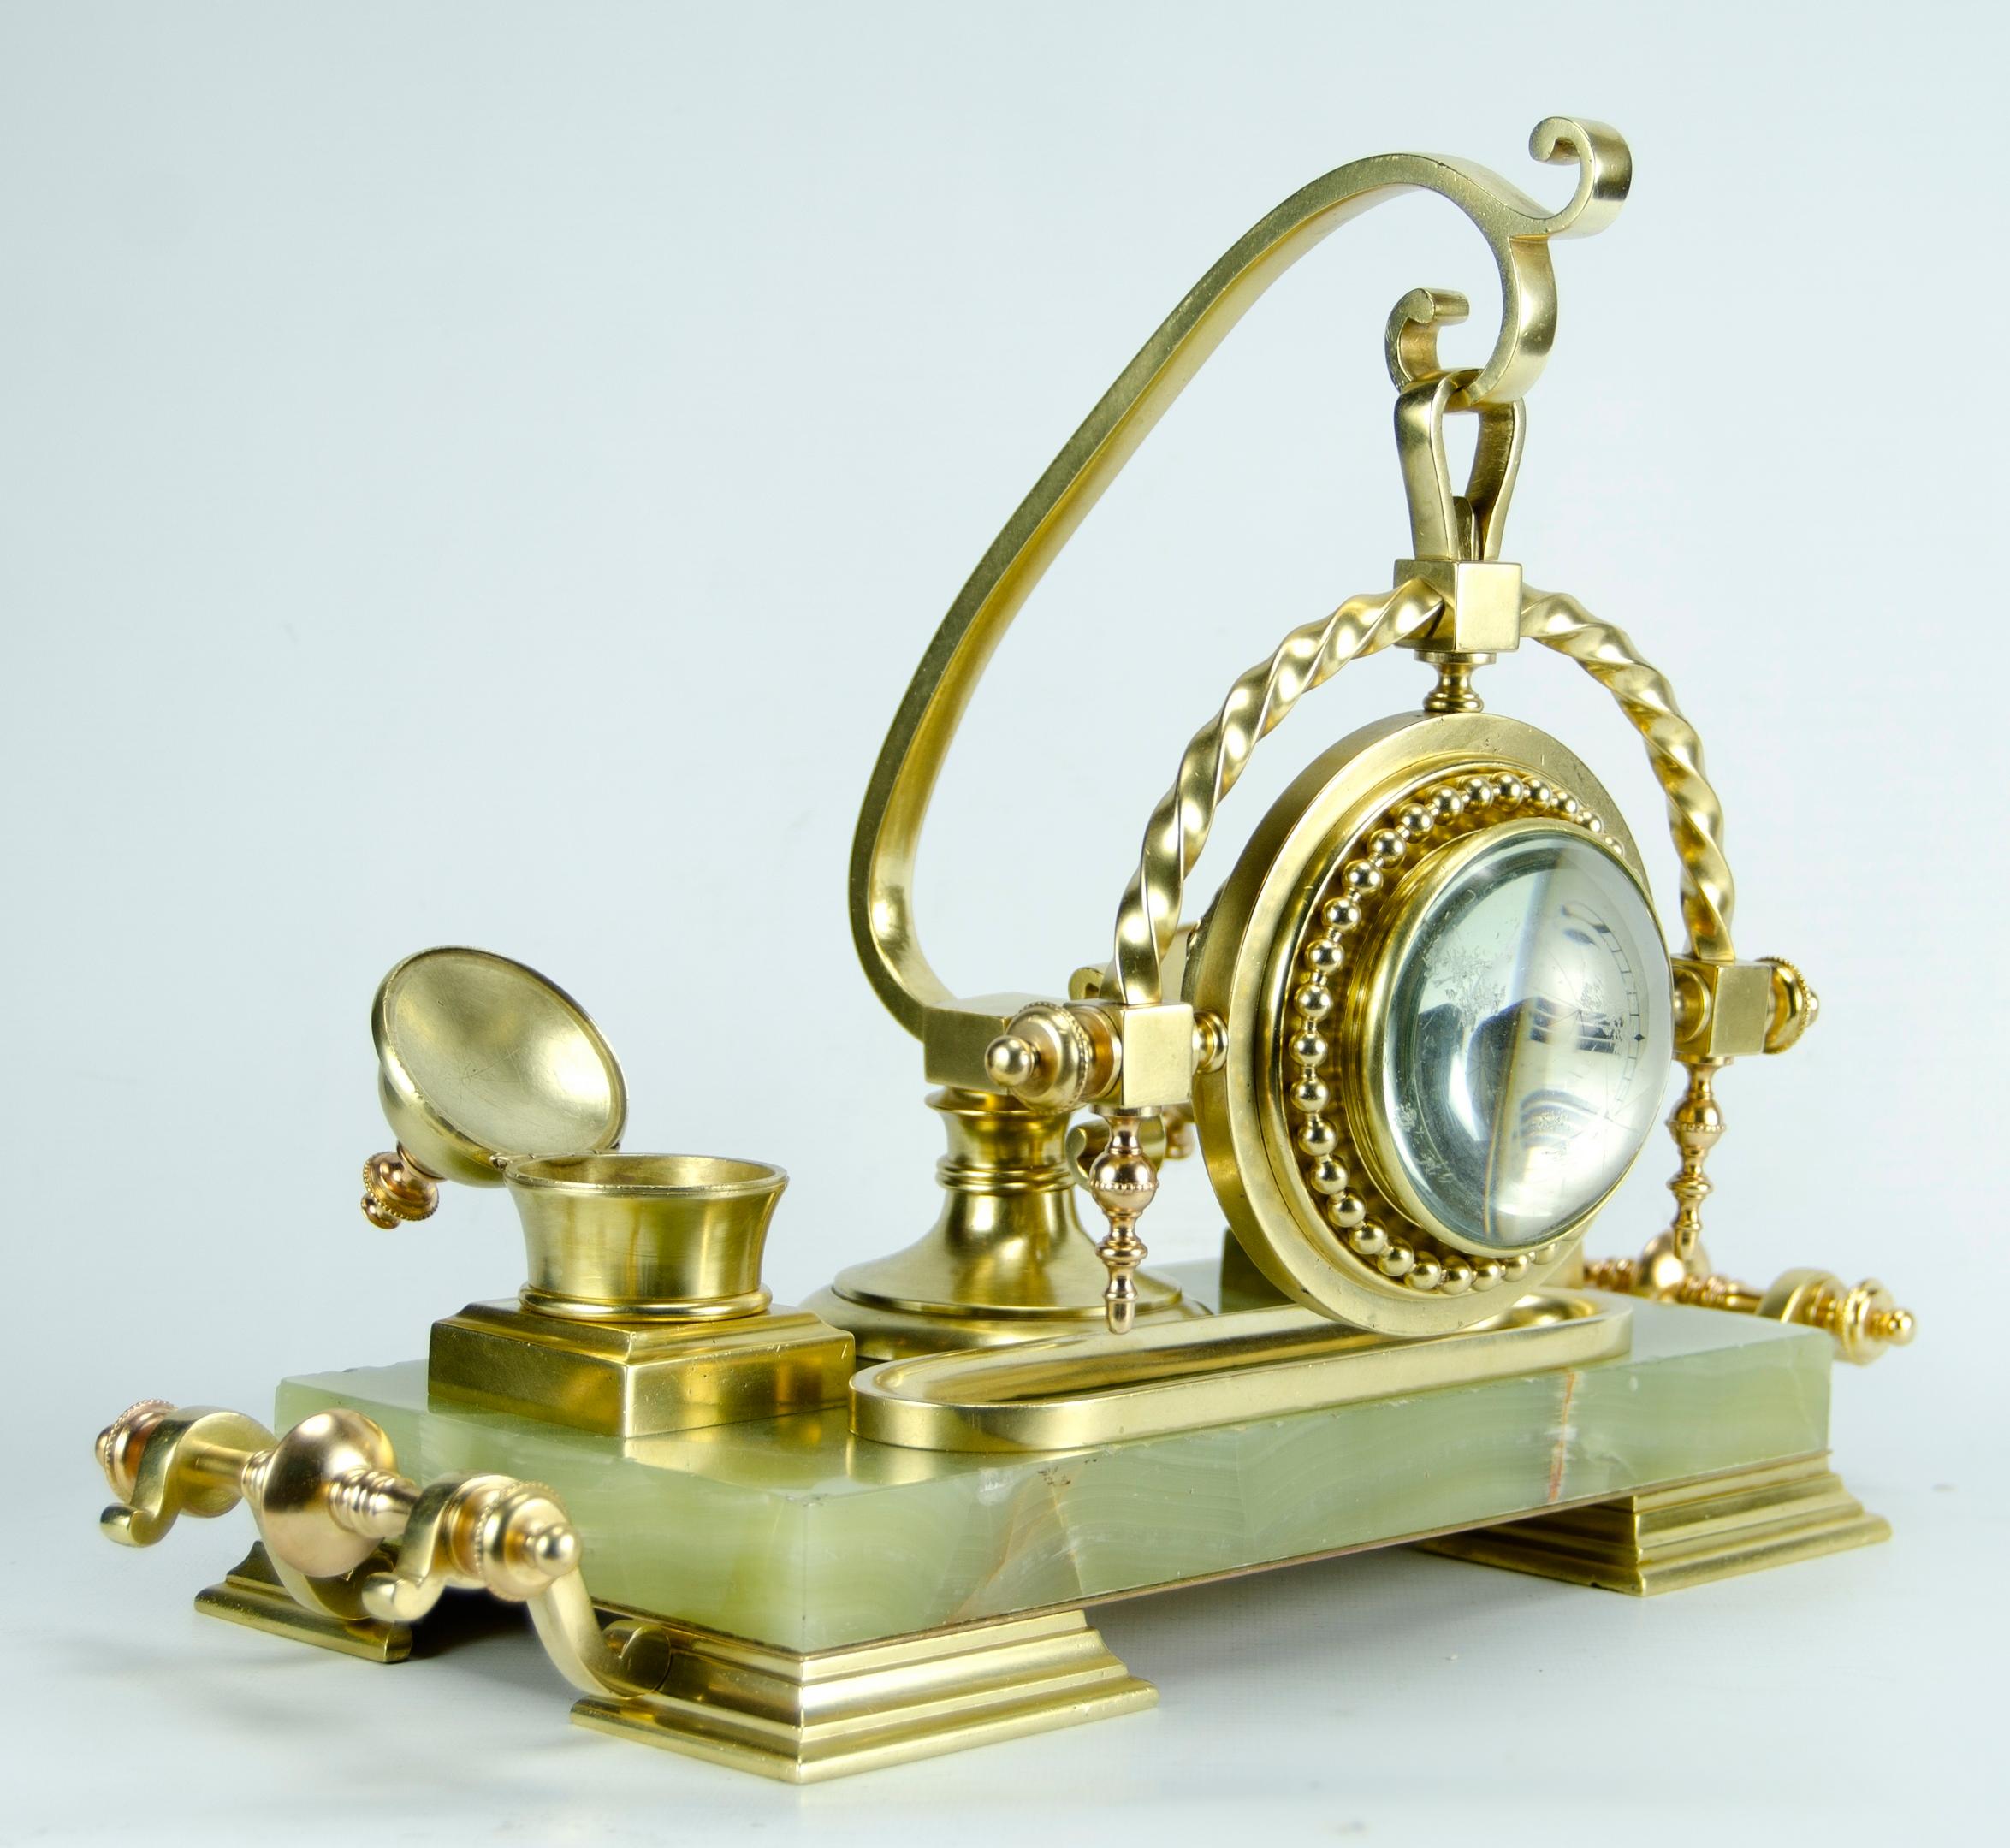 Empire style table clock and inkwell
Origin France Circa 1900
The watch has a Paris machine and it works
Golden bronze and Onix materials
Very good general condition
the marble has small chips
without restorations.